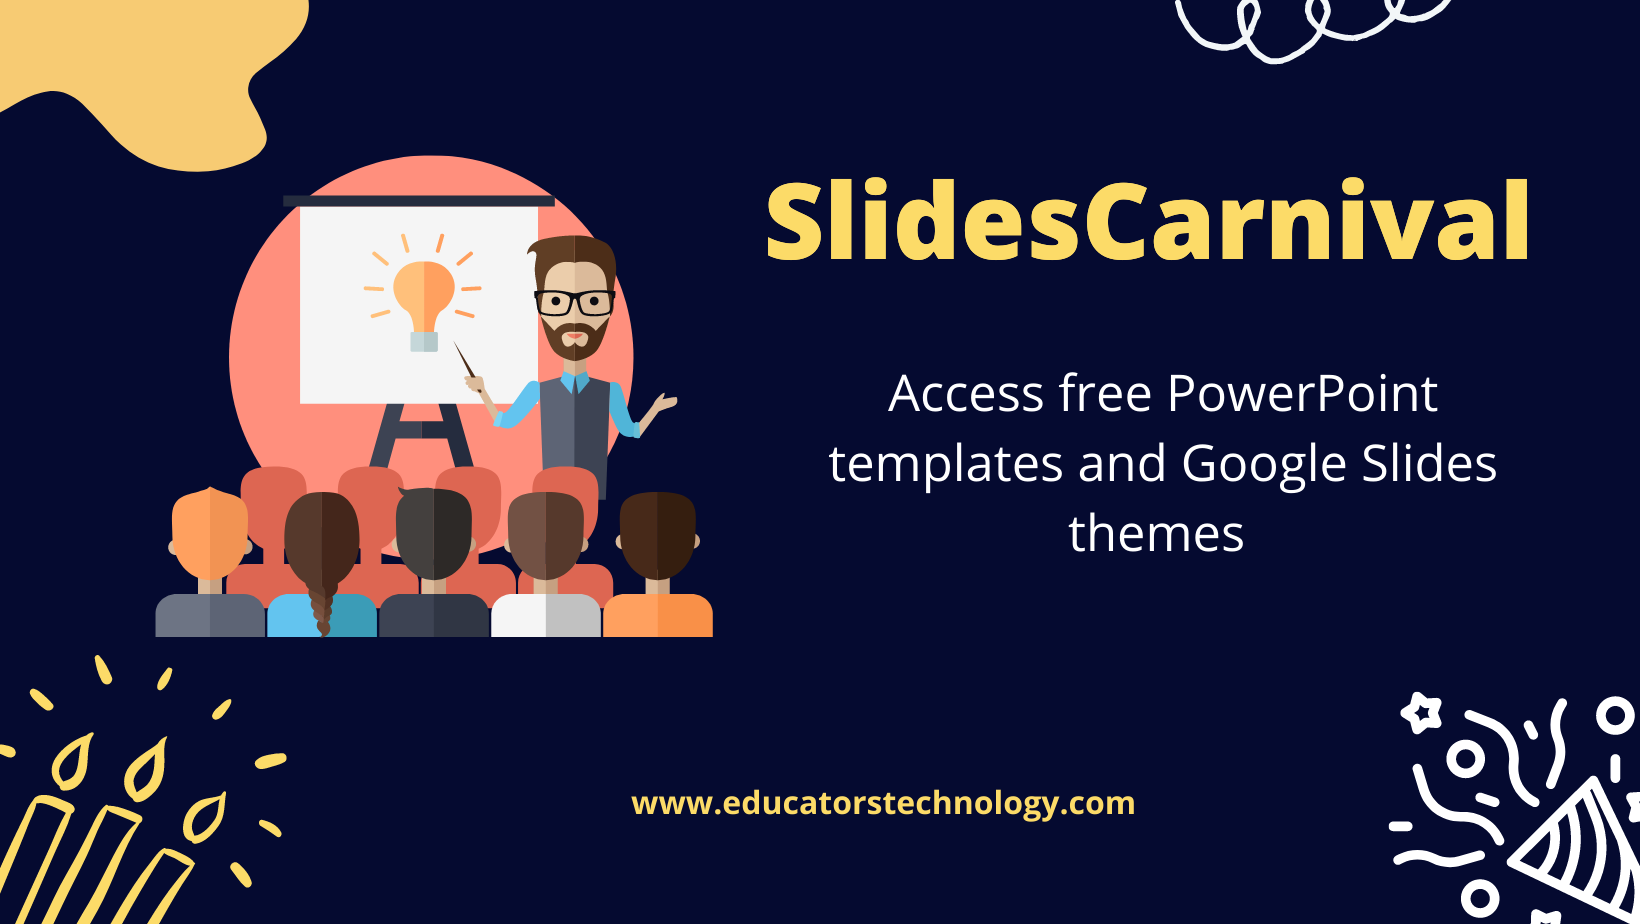 SlidesCarnival-free PowerPoint and Google Slides Templates